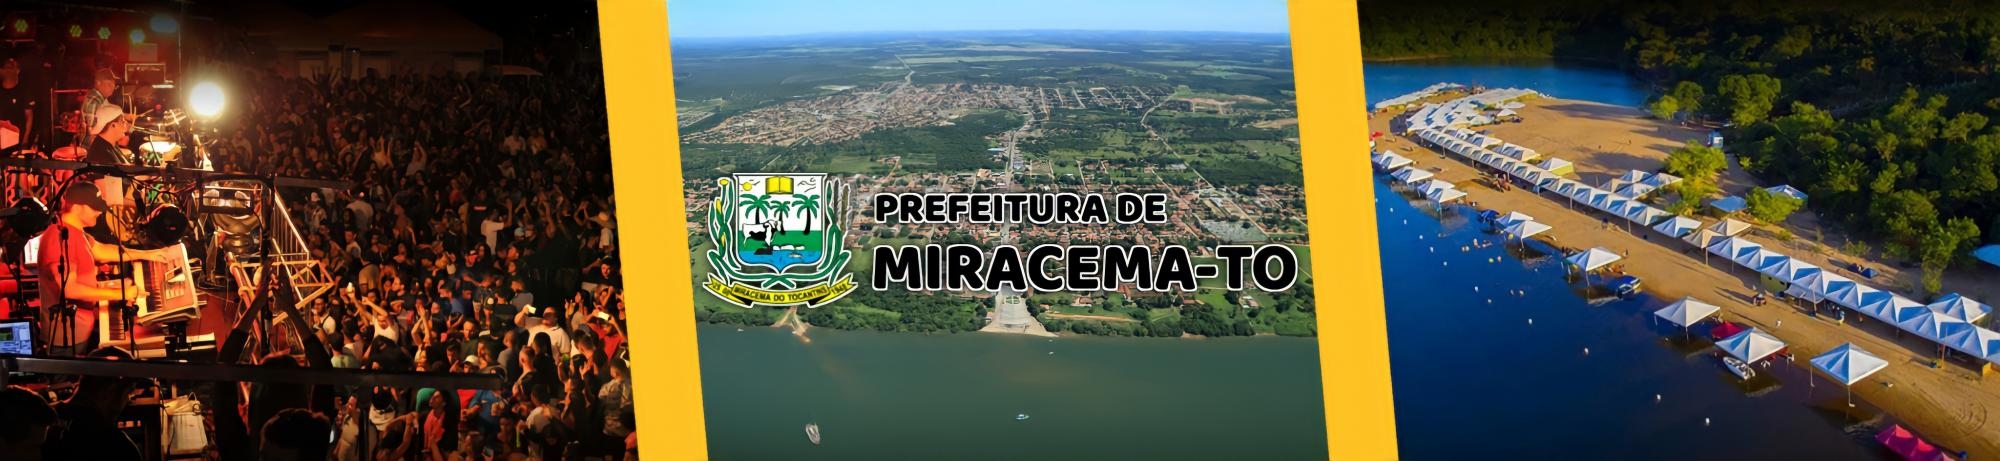 Miracema-TO